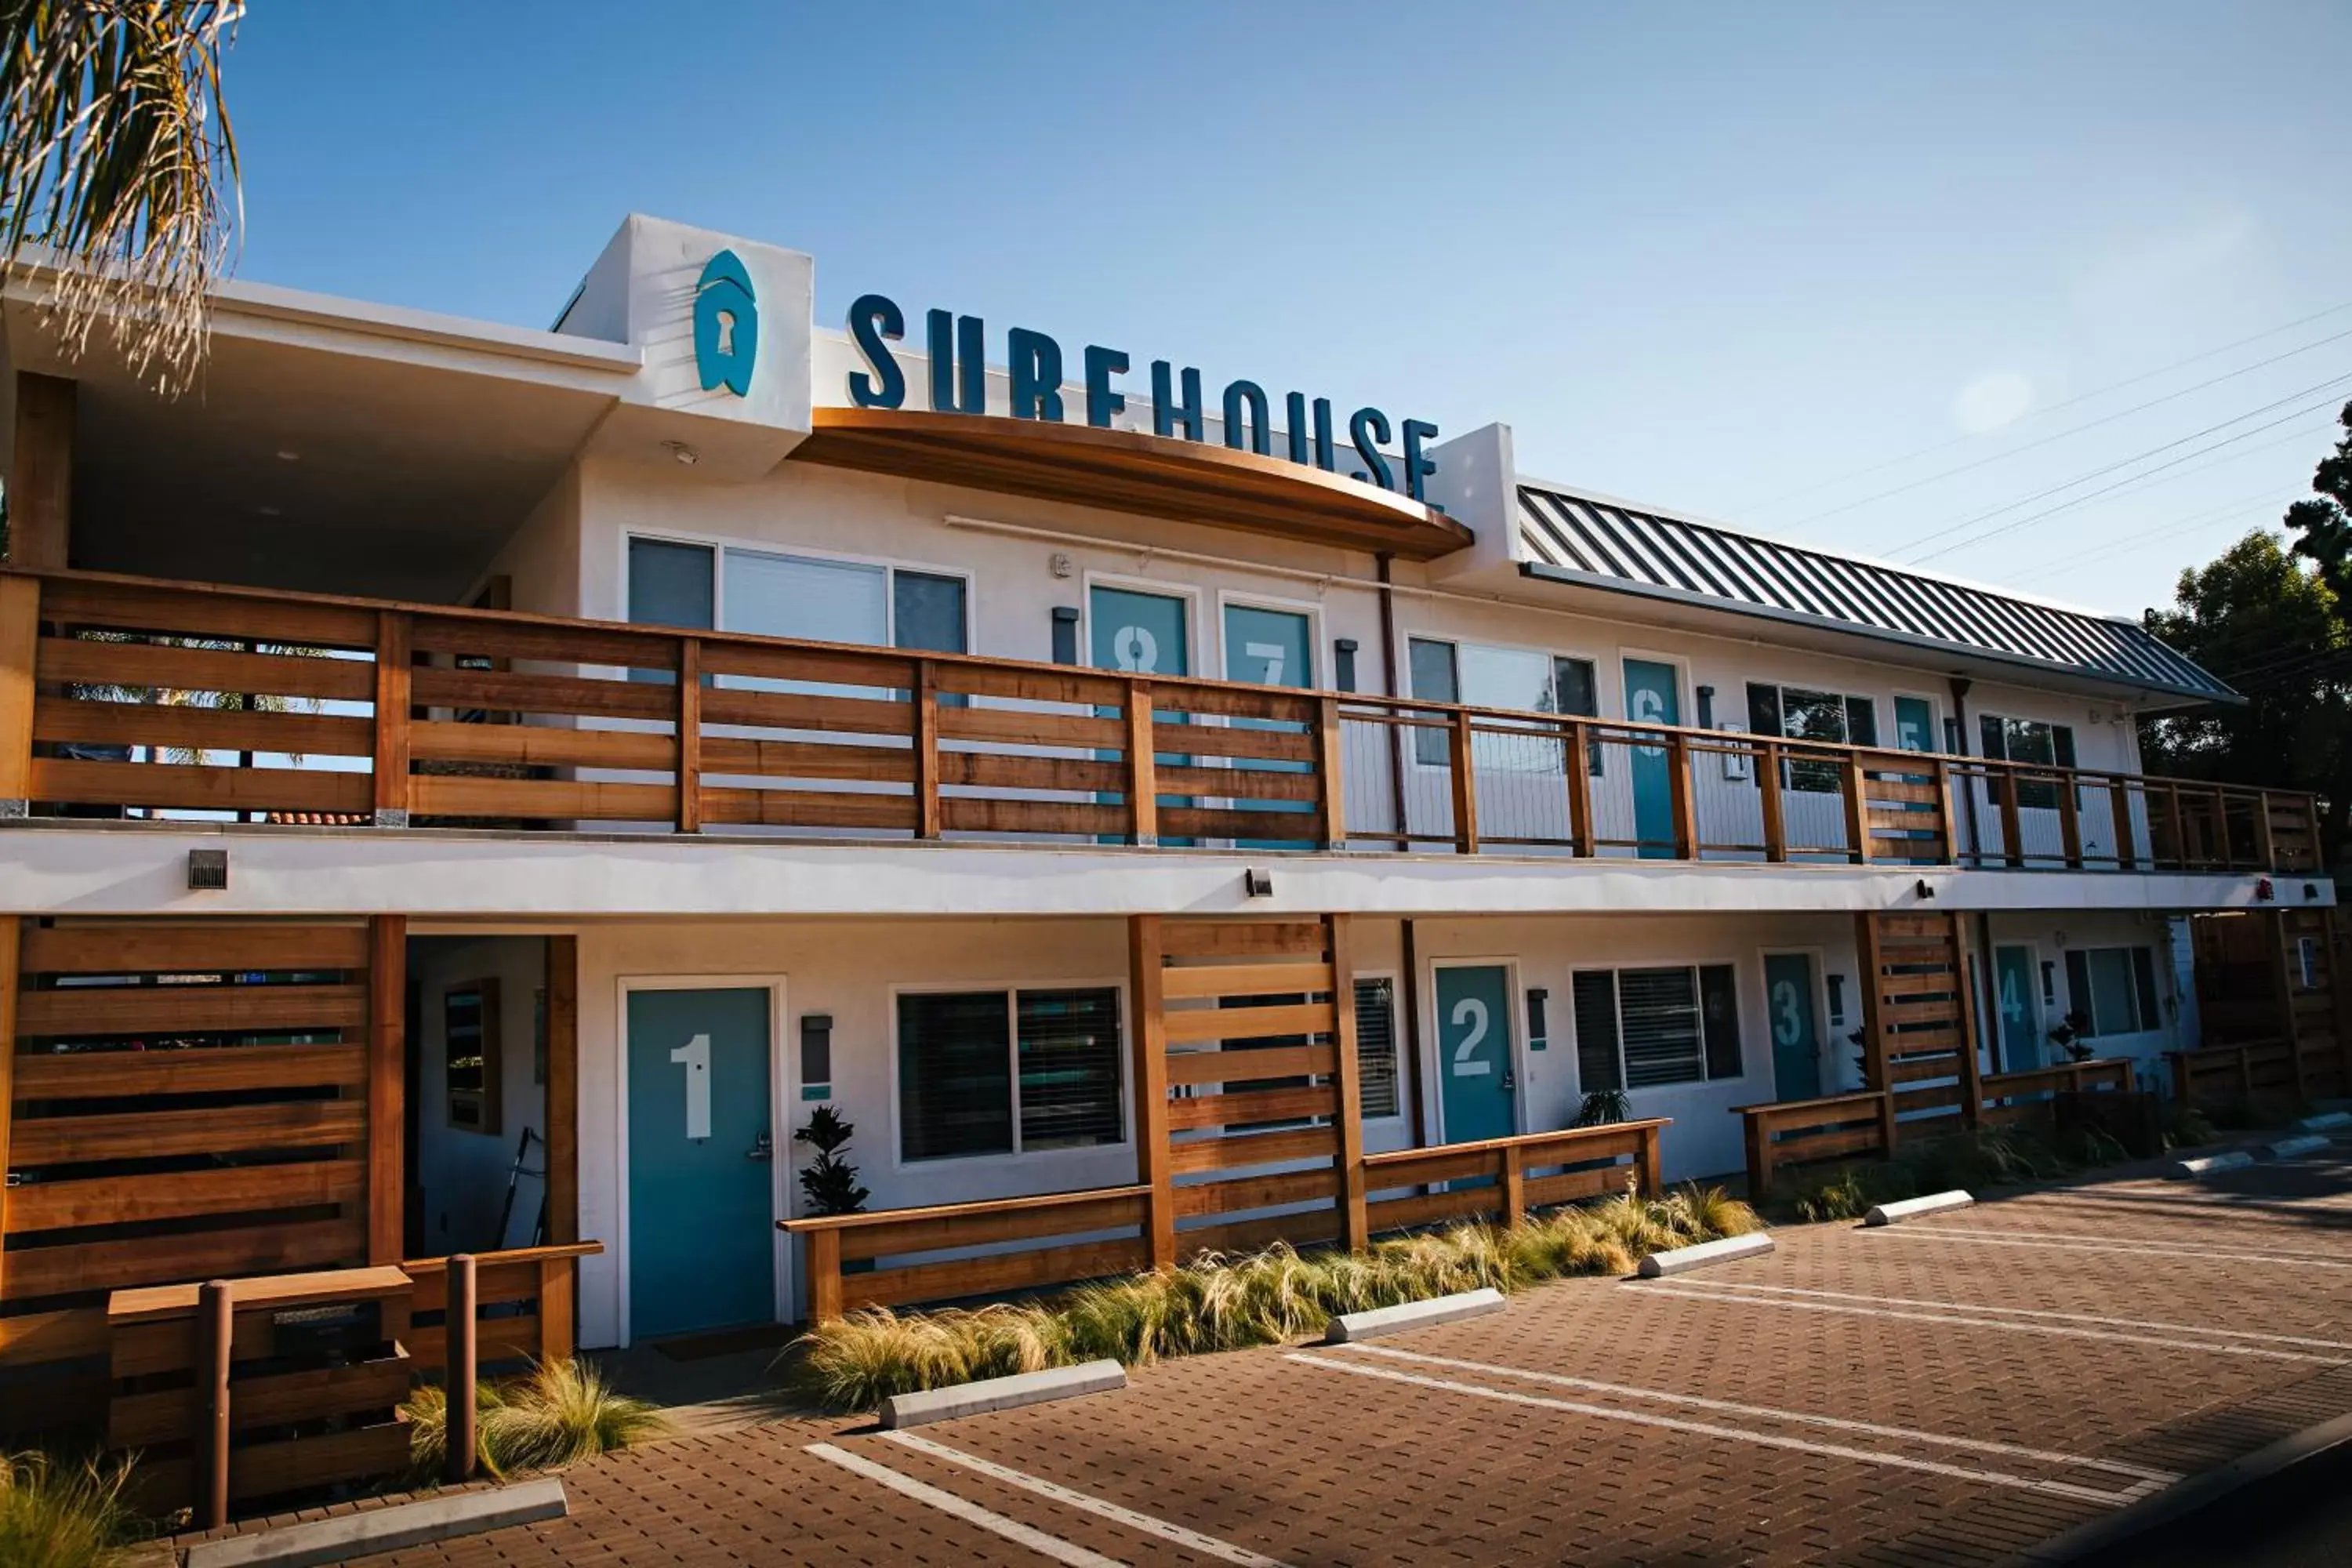 Property Building in Surfhouse